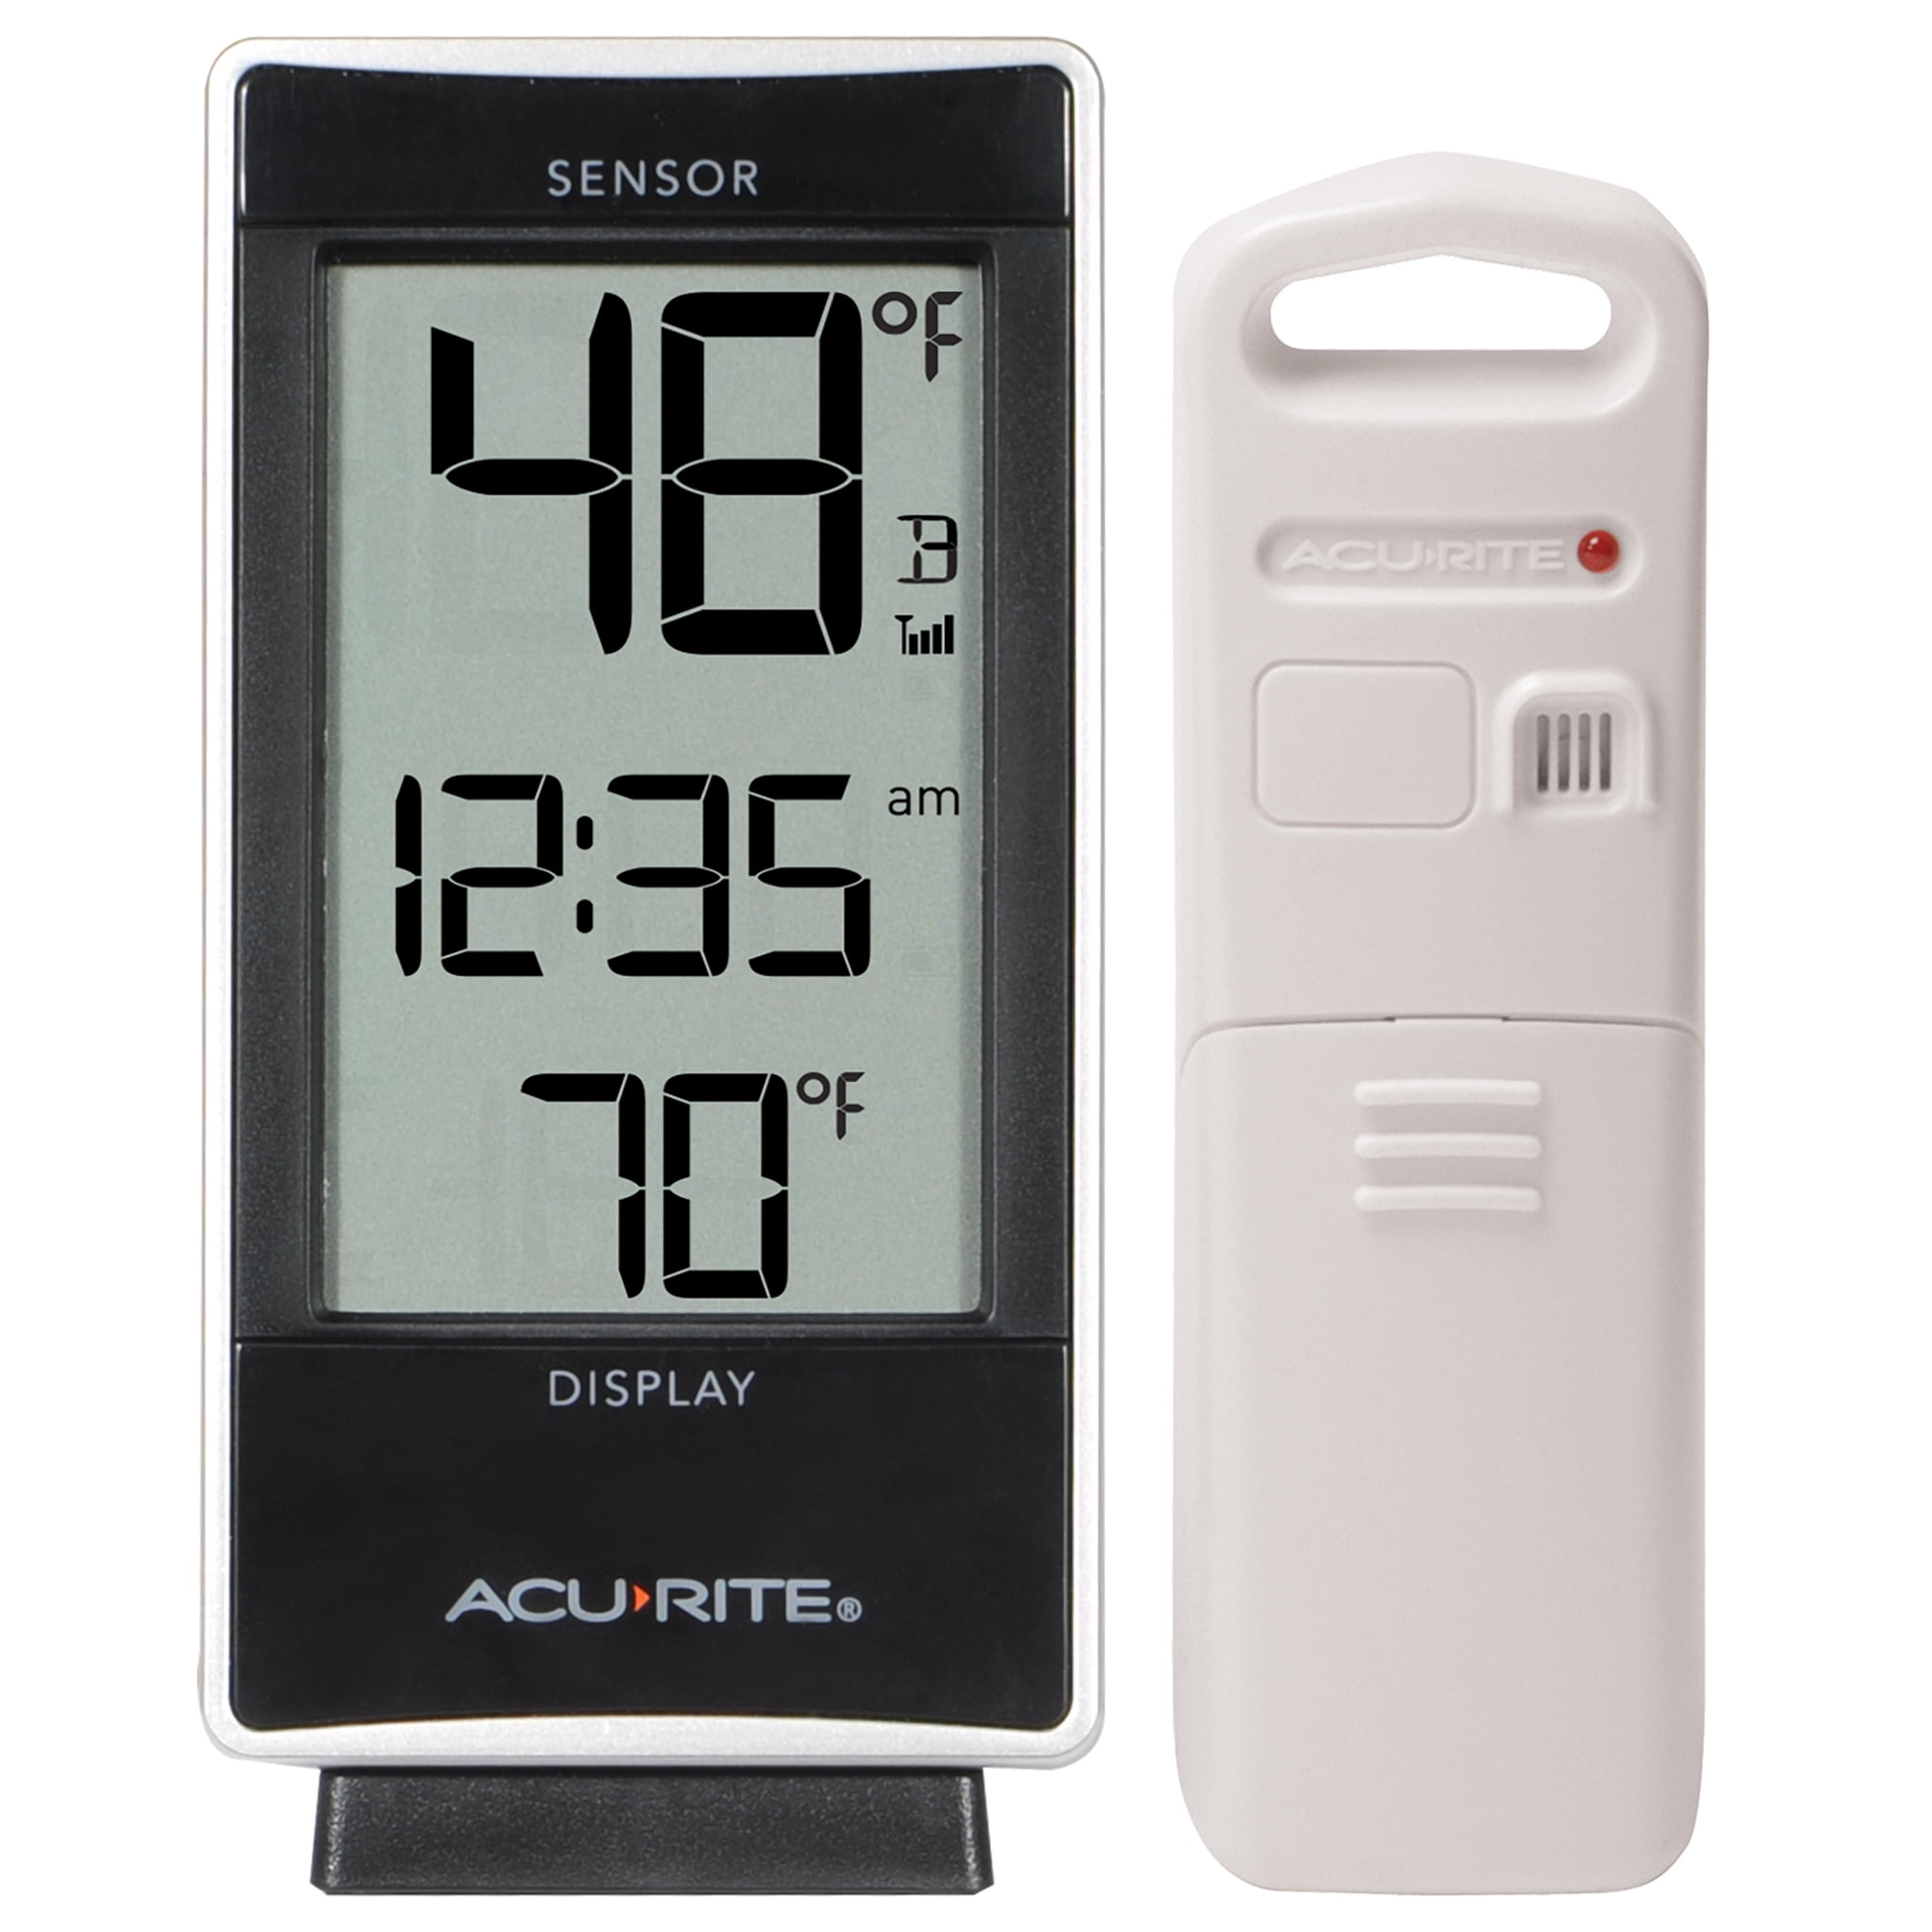 Buy the Chaney/AcuRite 01360 Indoor/Outdoor Thermometer, Basic